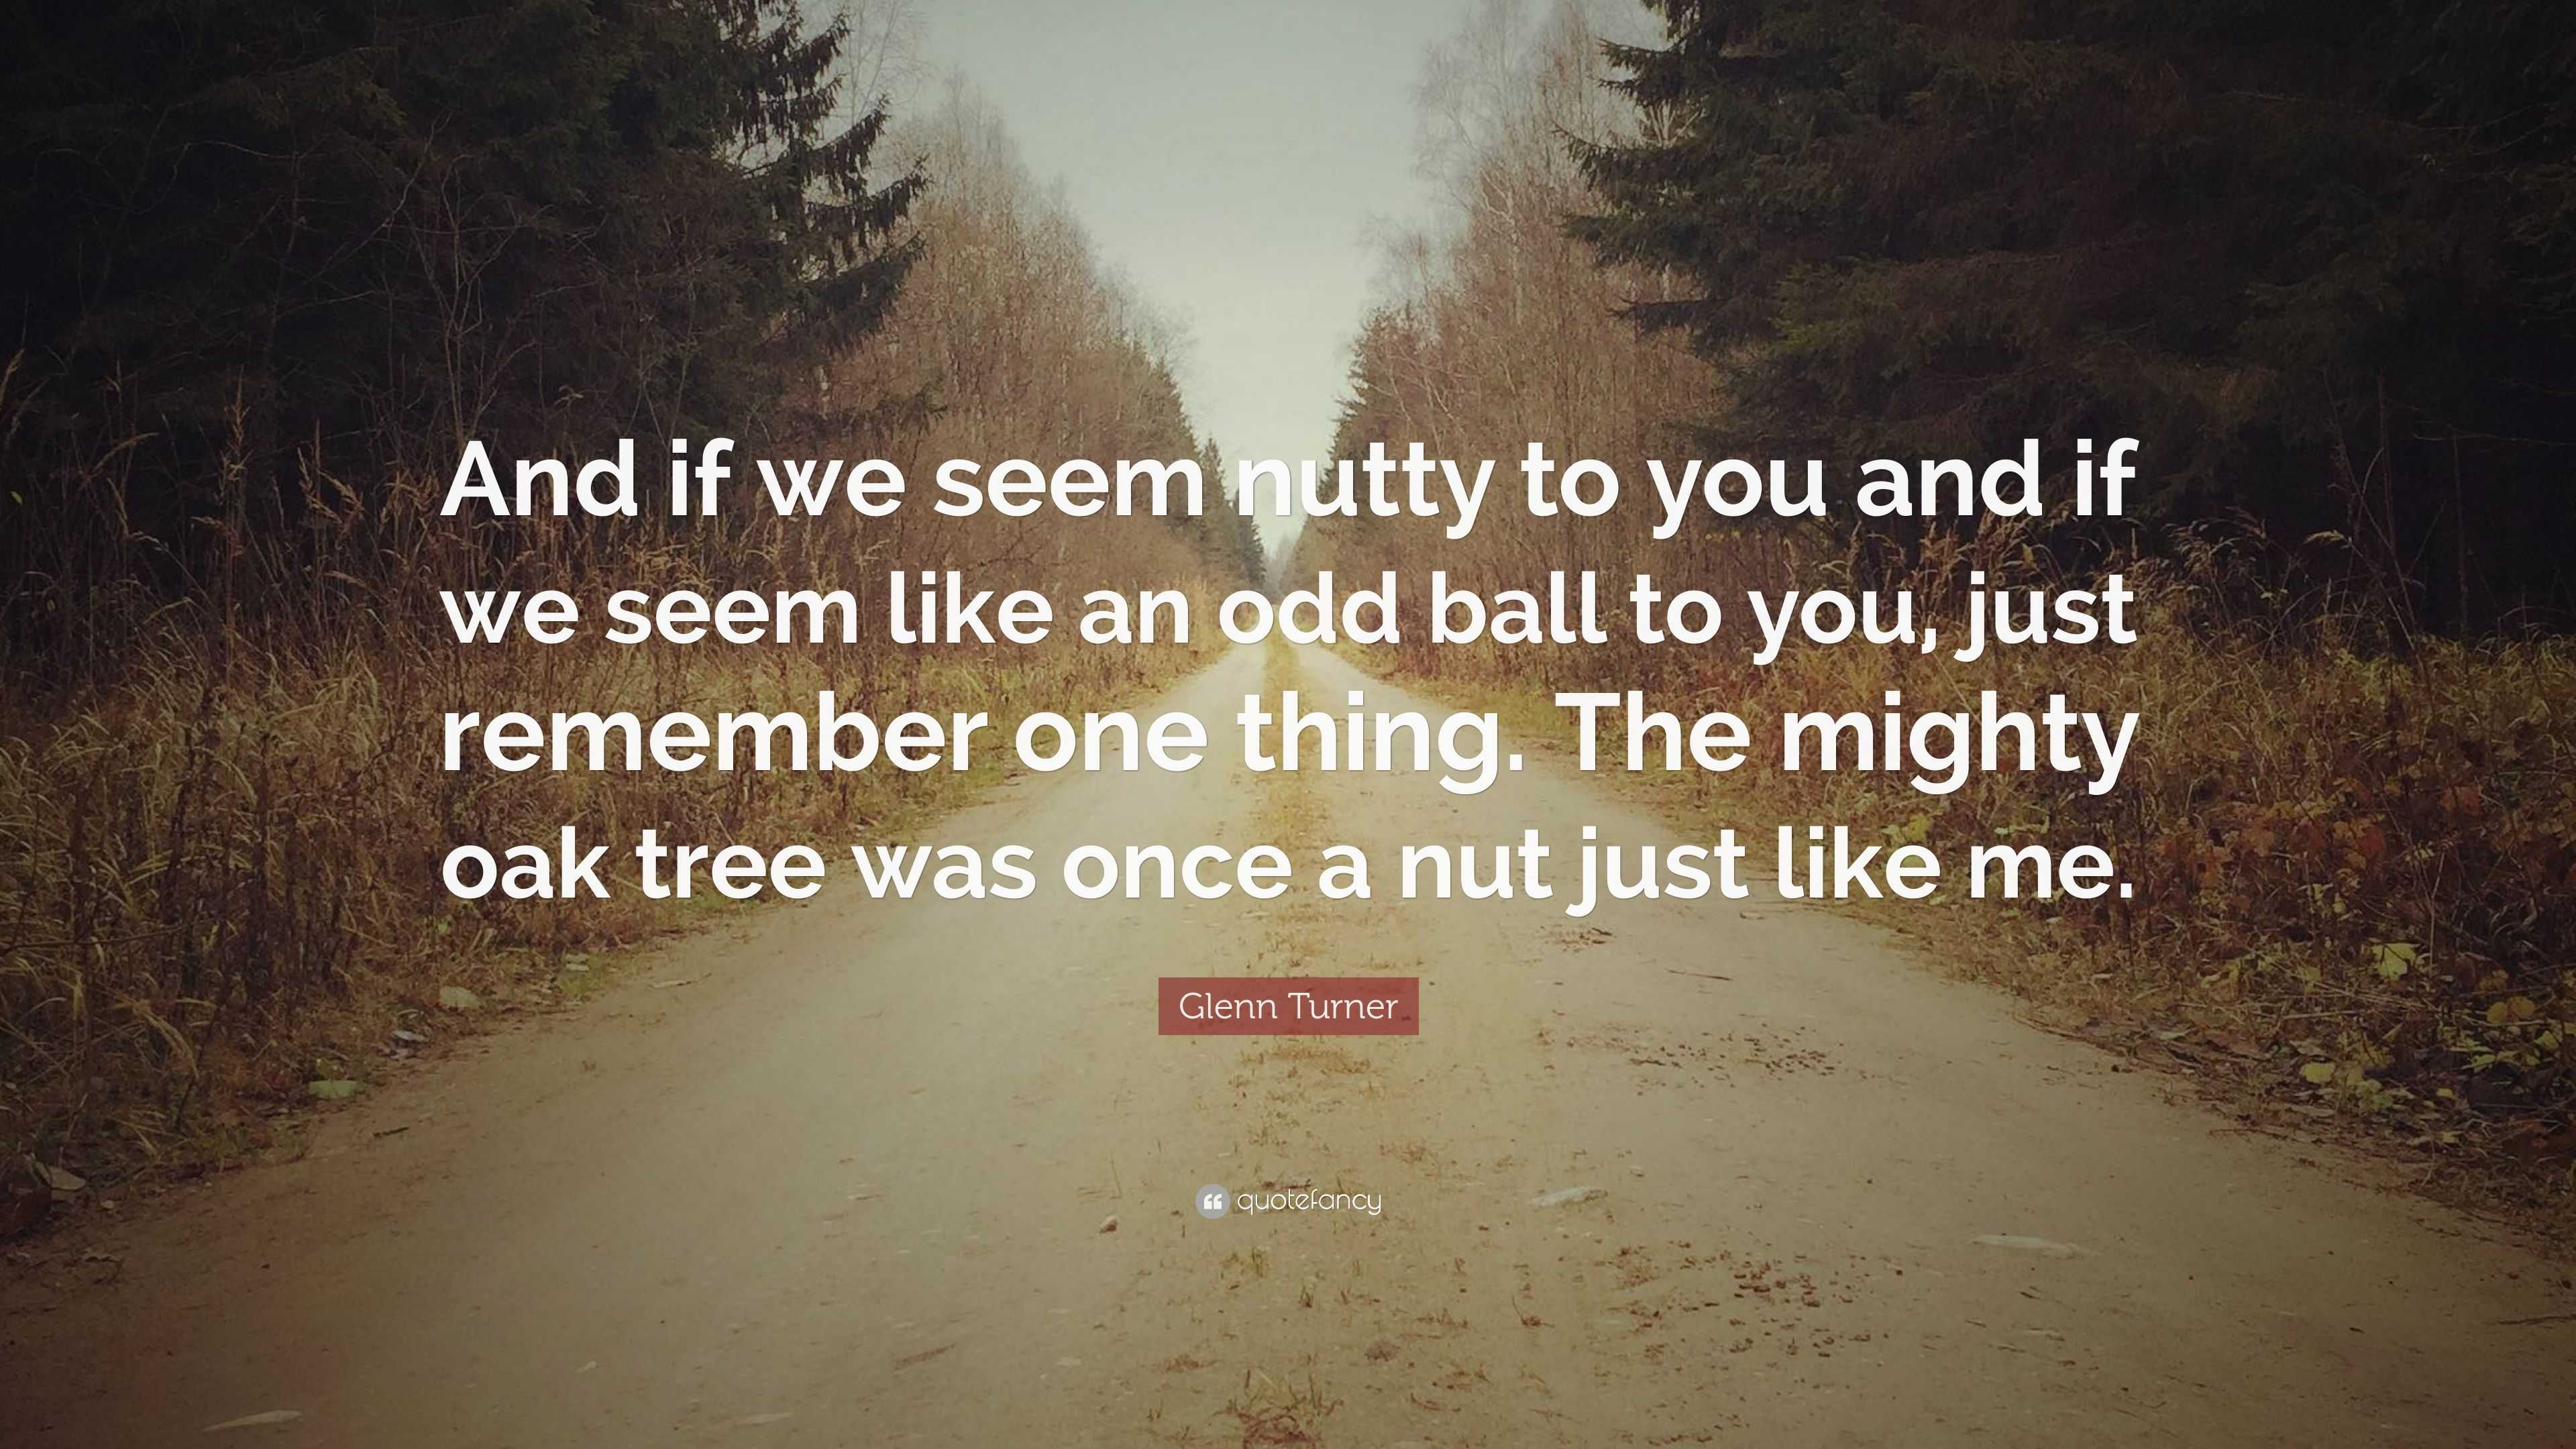 Glenn Turner Quote And If We Seem Nutty To You And If We Seem Like An Odd Ball To You Just Remember One Thing The Mighty Oak Tree Was Onc